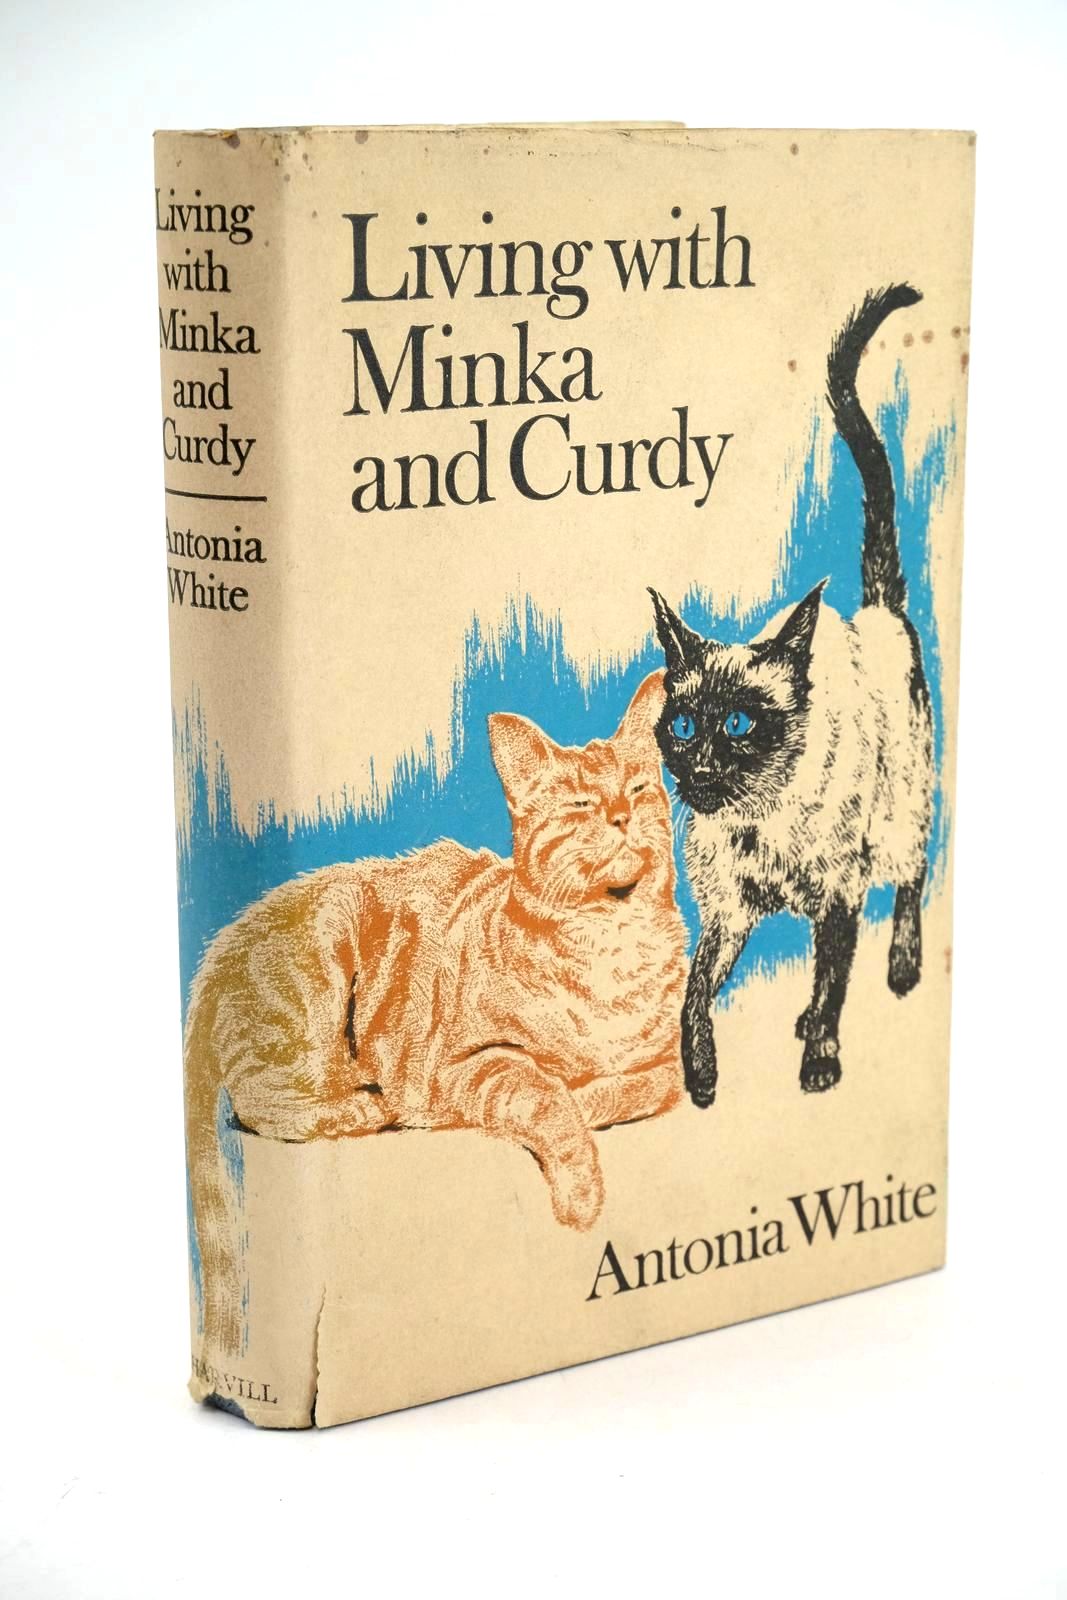 Photo of LIVING WITH MINKA AND CURDY written by White, Antonia published by The Harvill Press (STOCK CODE: 1324076)  for sale by Stella & Rose's Books